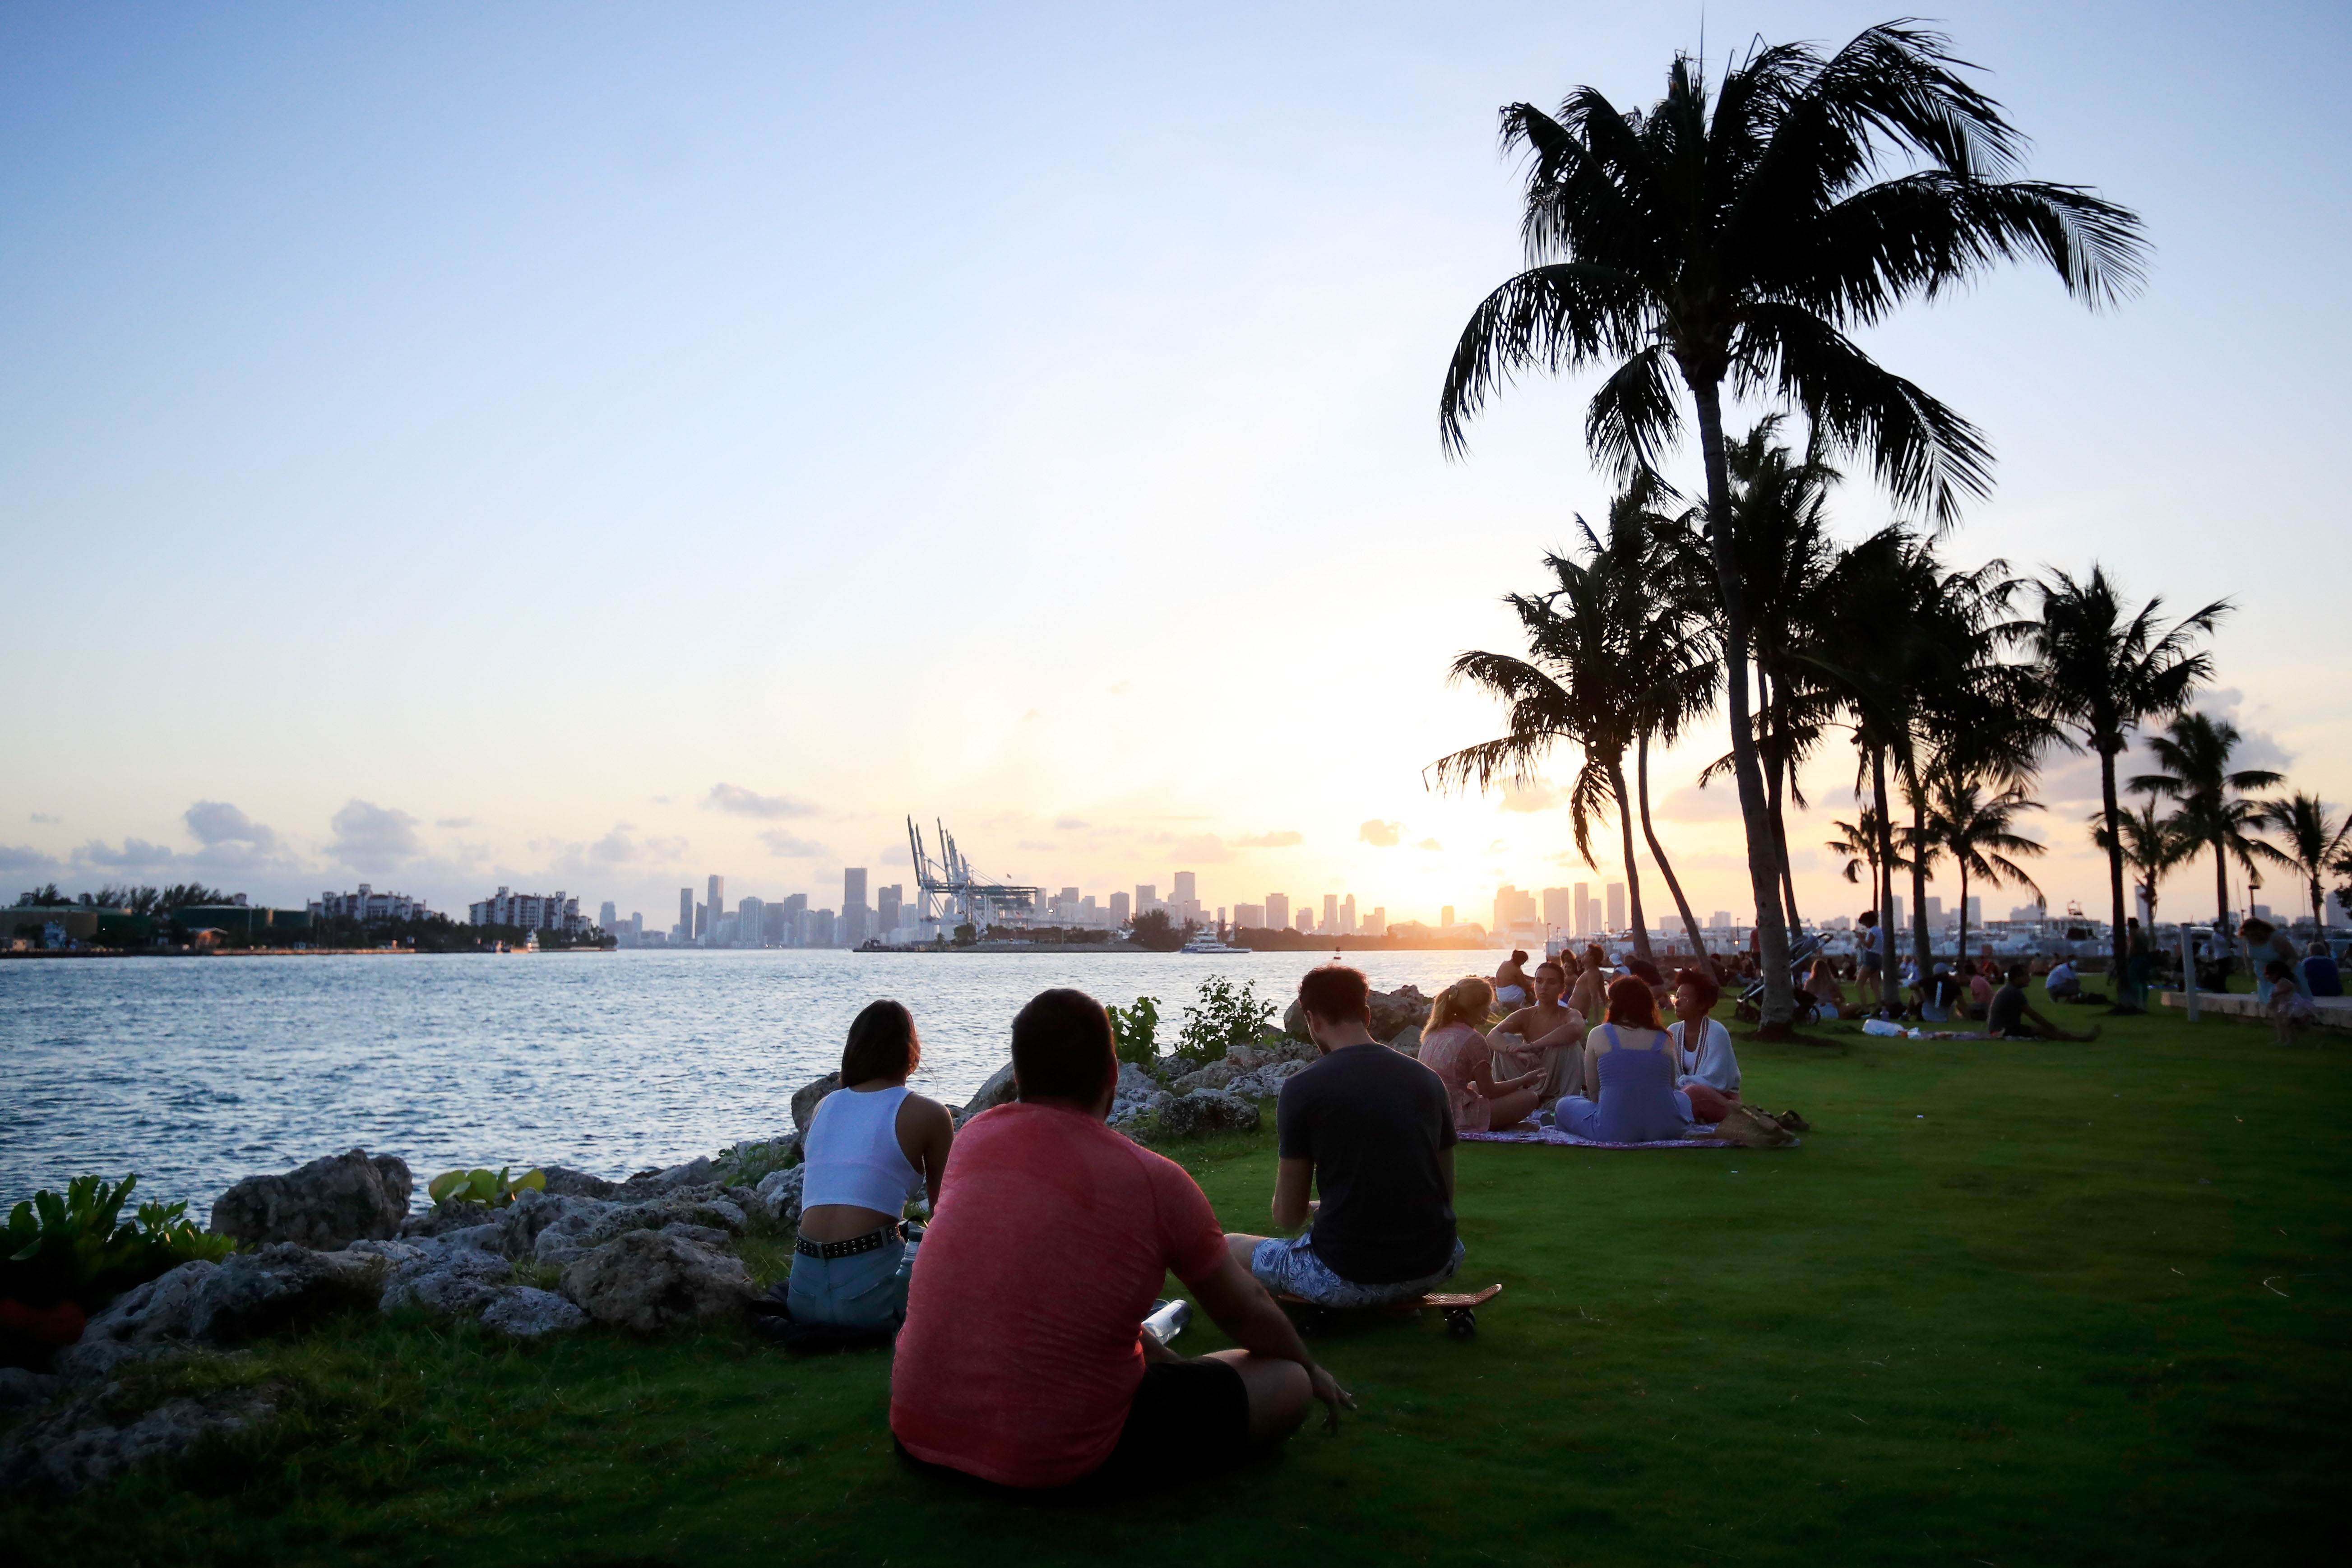 People gather for sunset in South Pointe Park on April 29 in Miami Beach, Florida.